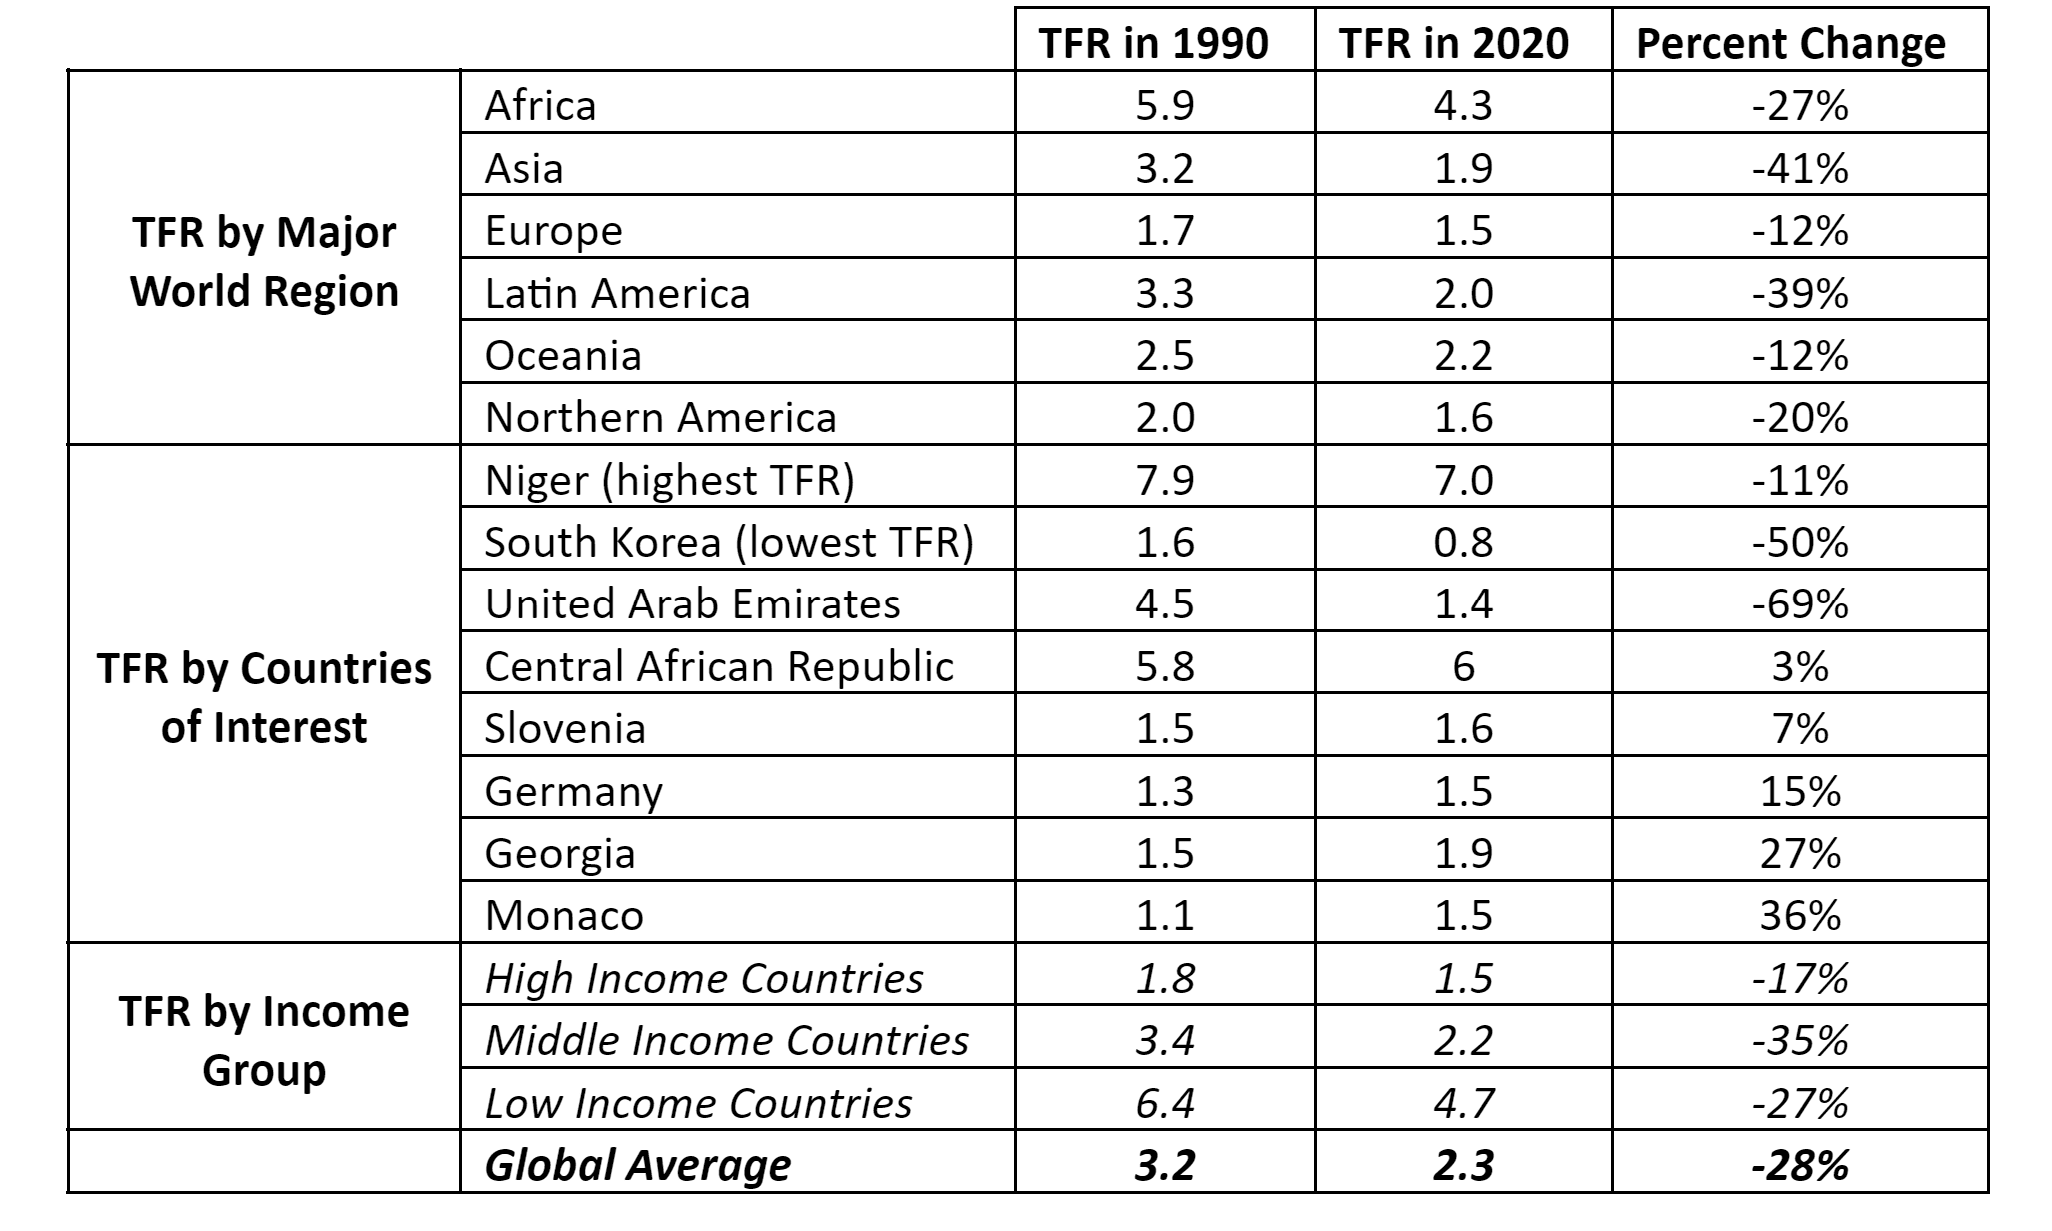 Table of TFR by major world region, countries, of interest, and income group